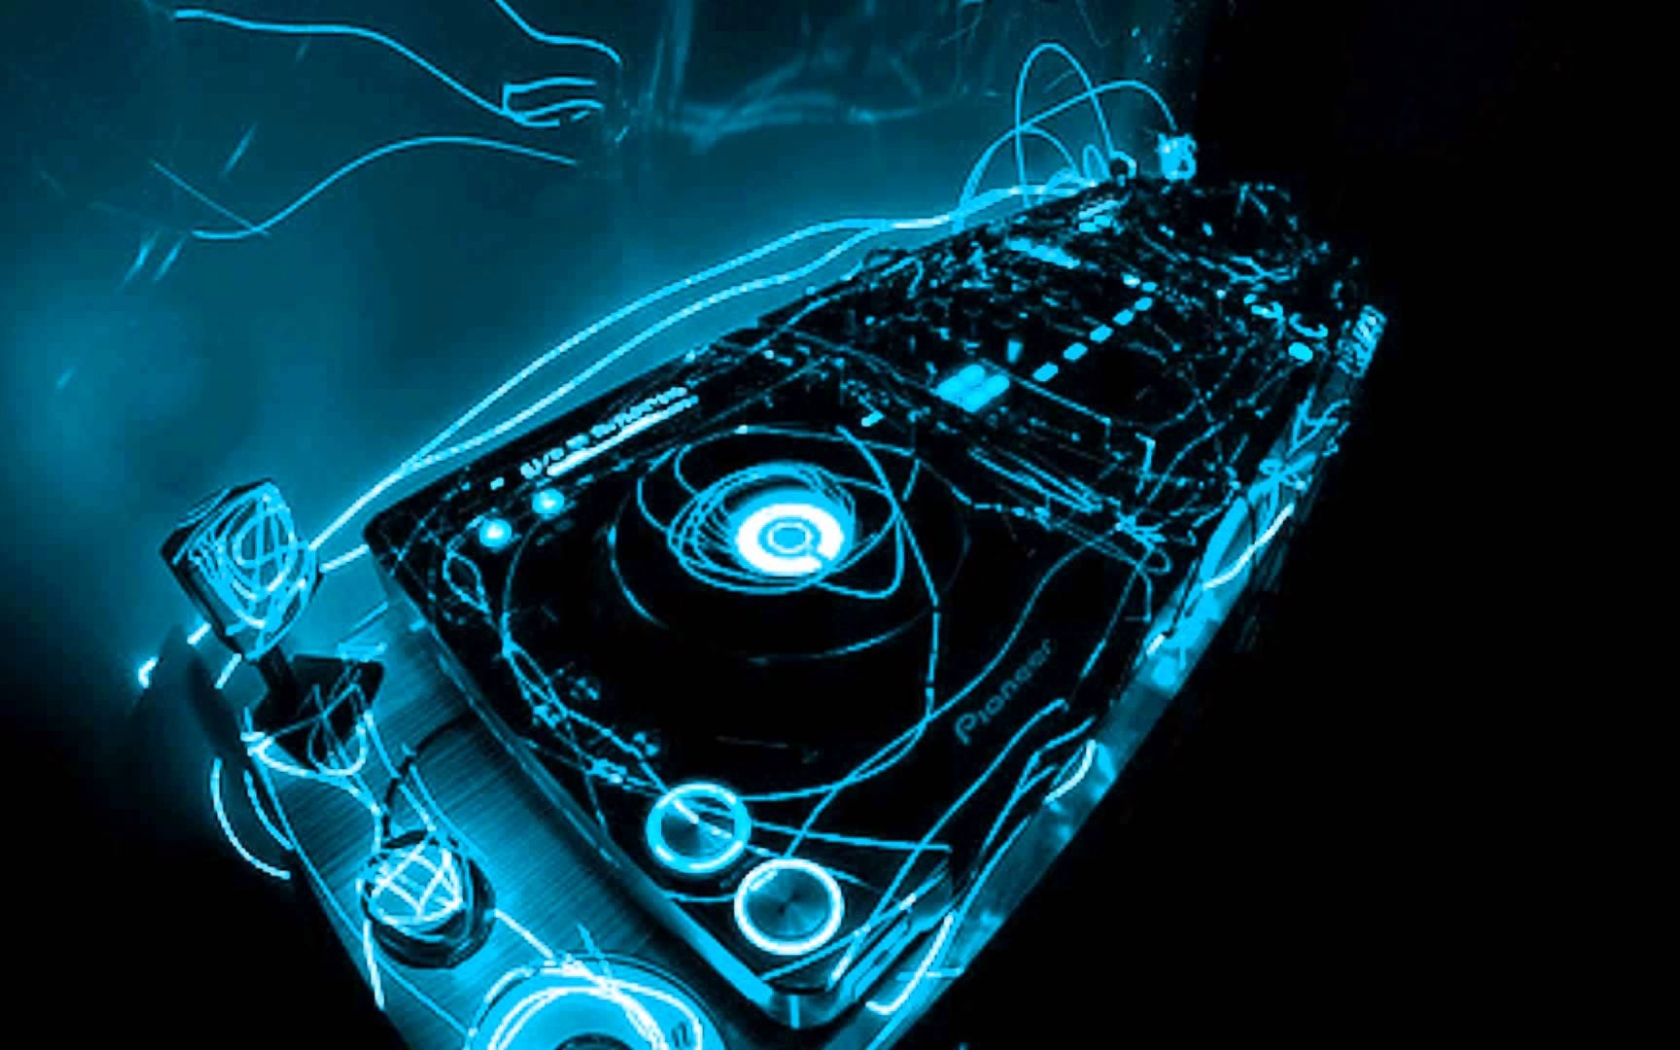 Cool Dubstep Wallpapers